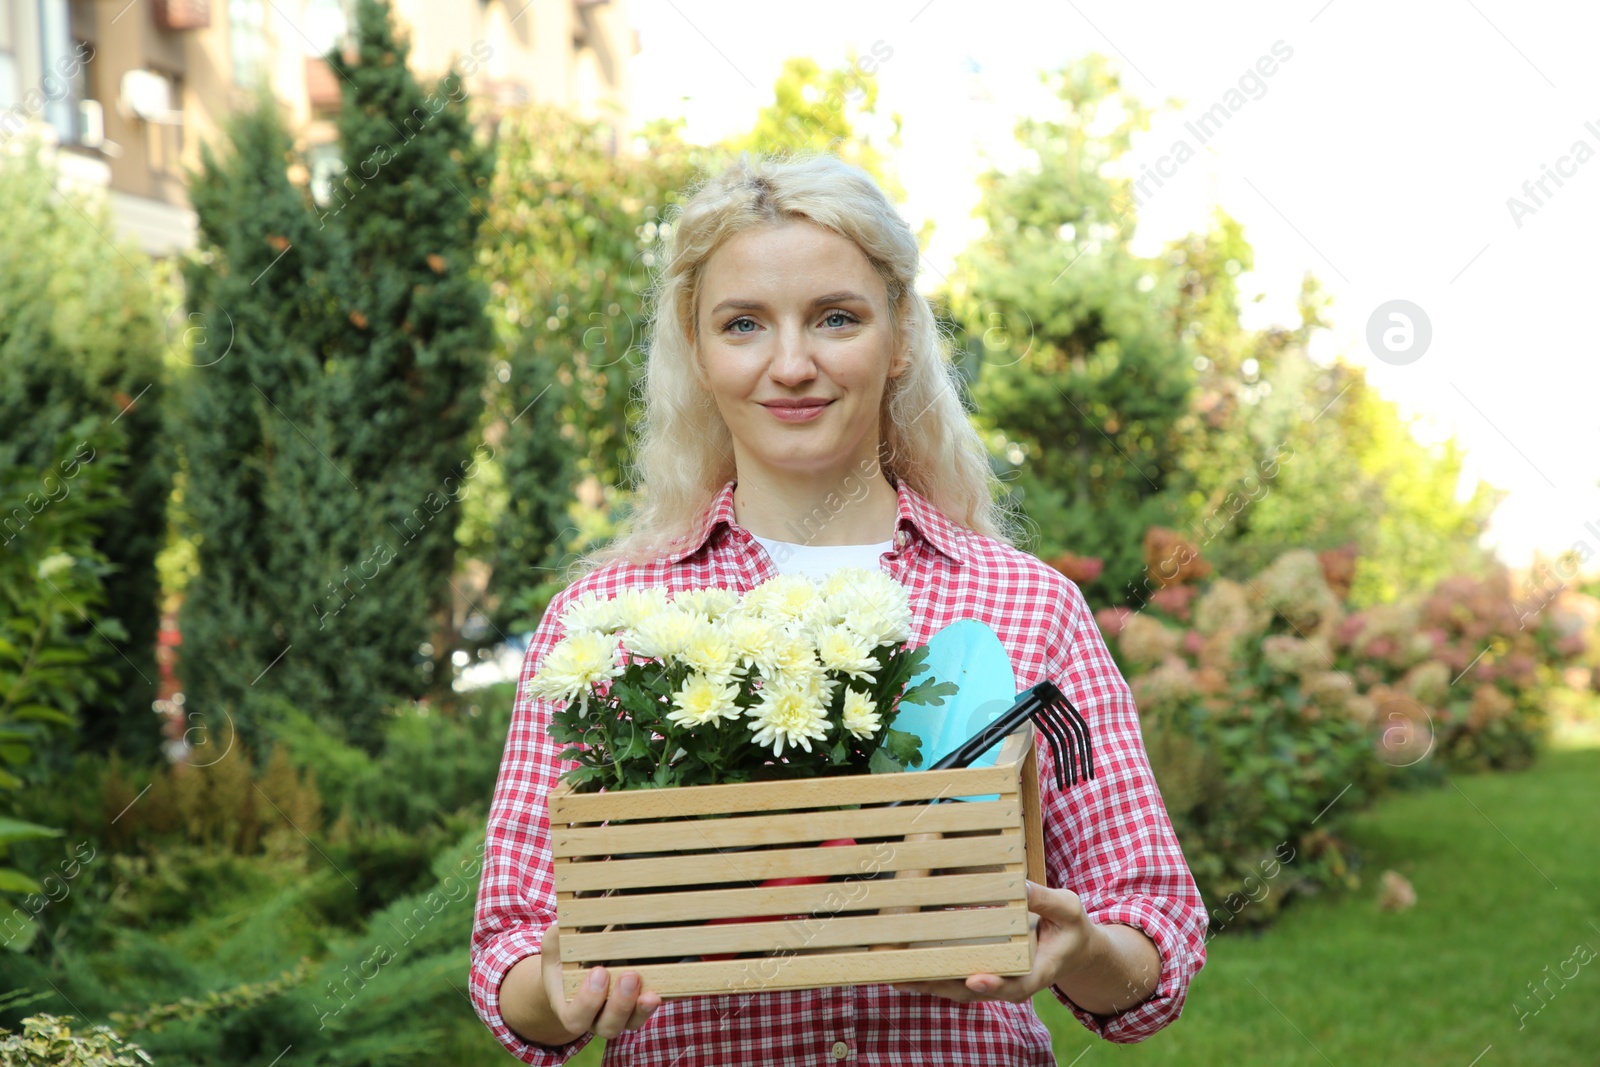 Photo of Woman holding wooden crate with chrysanthemum flowers and tools in garden